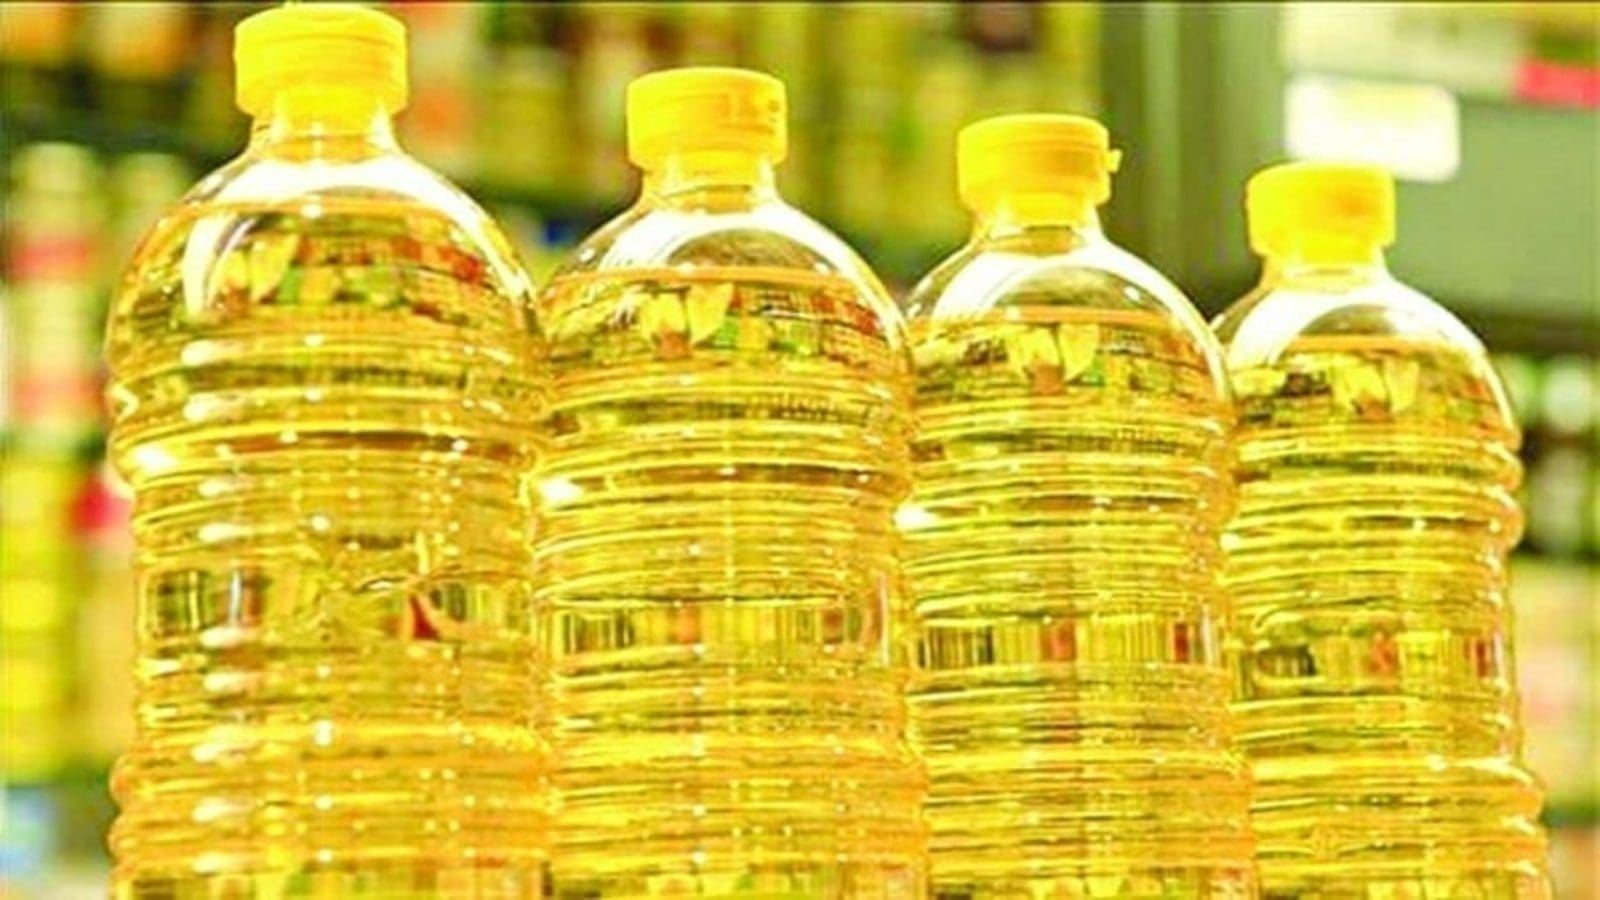 Mozambique cooking oil producers panic over  plastic bottle tax,  could negatively affect the sector